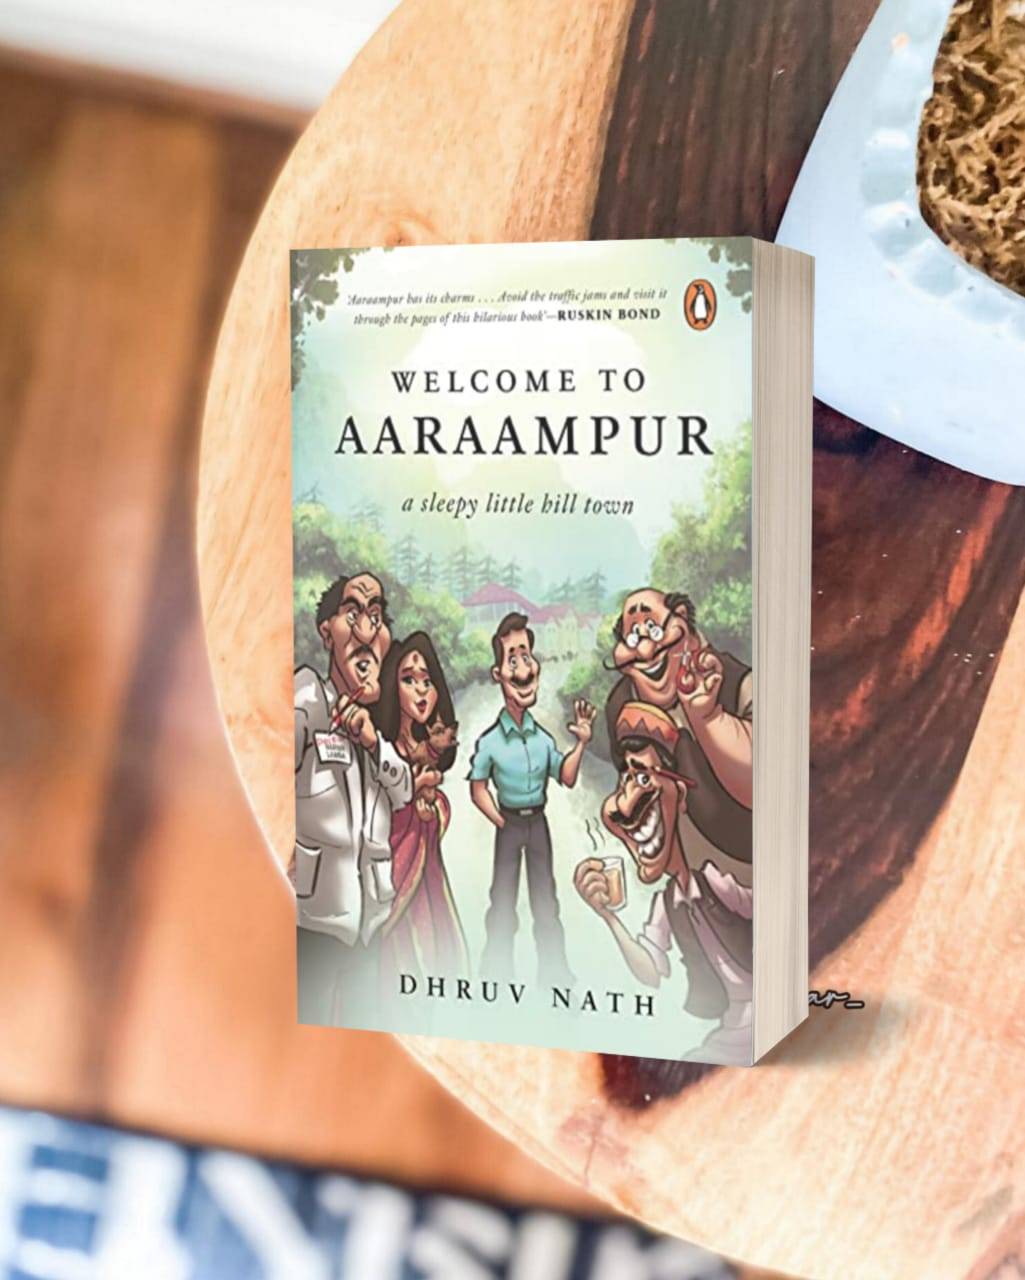 Book Review: “Welcome to Aaraampur”